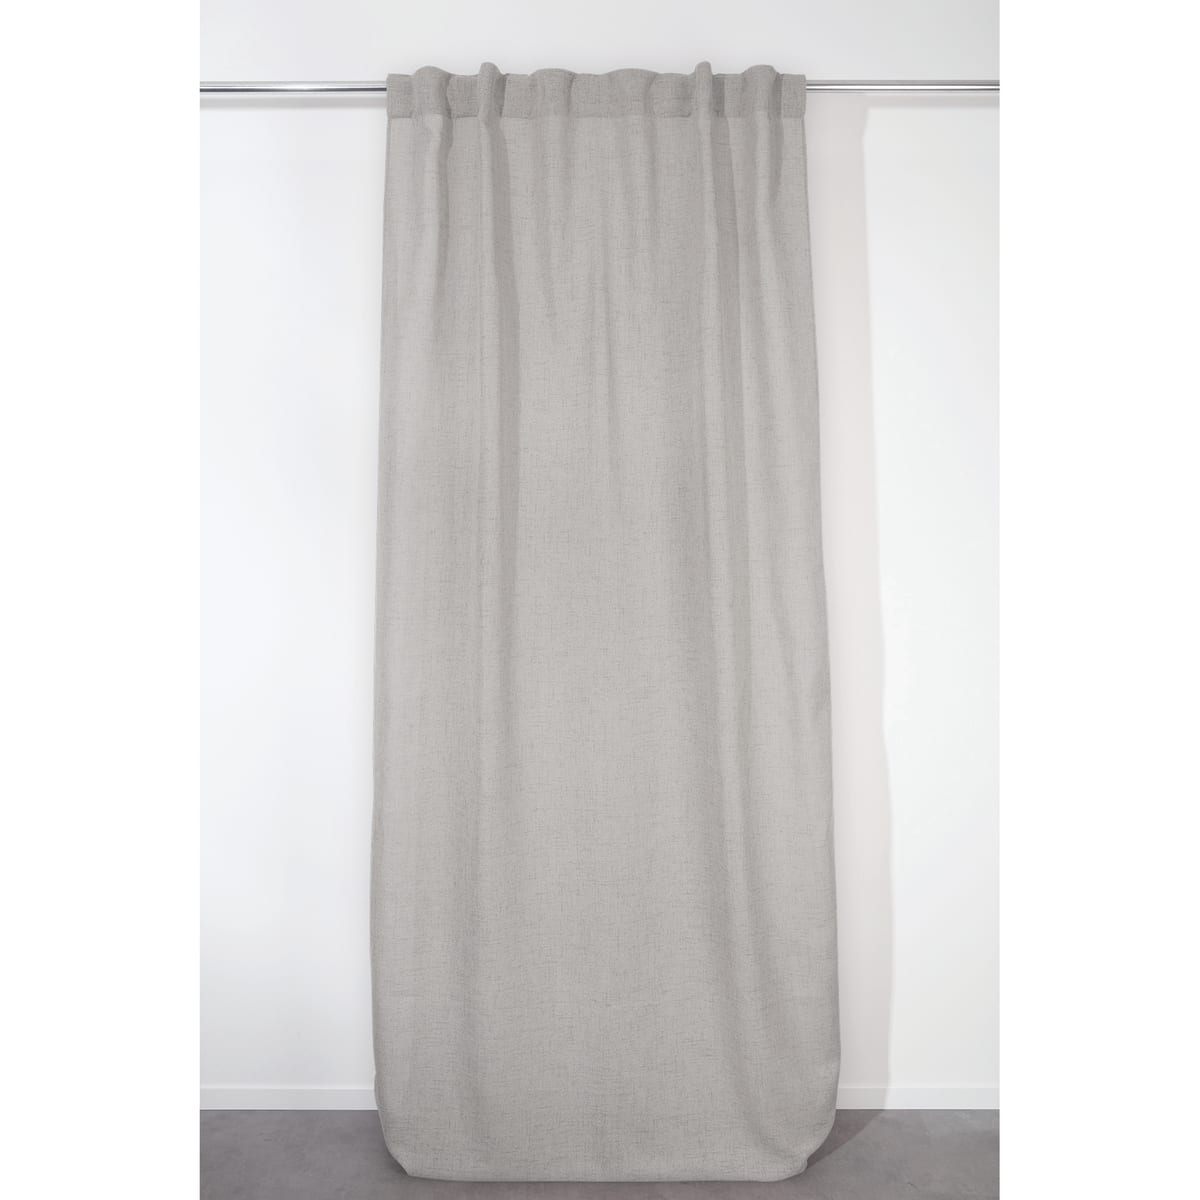 LIGHT GREY OPAQUE COLOSO CURTAIN 135X280 CM WITH LOOP AND WEBBING